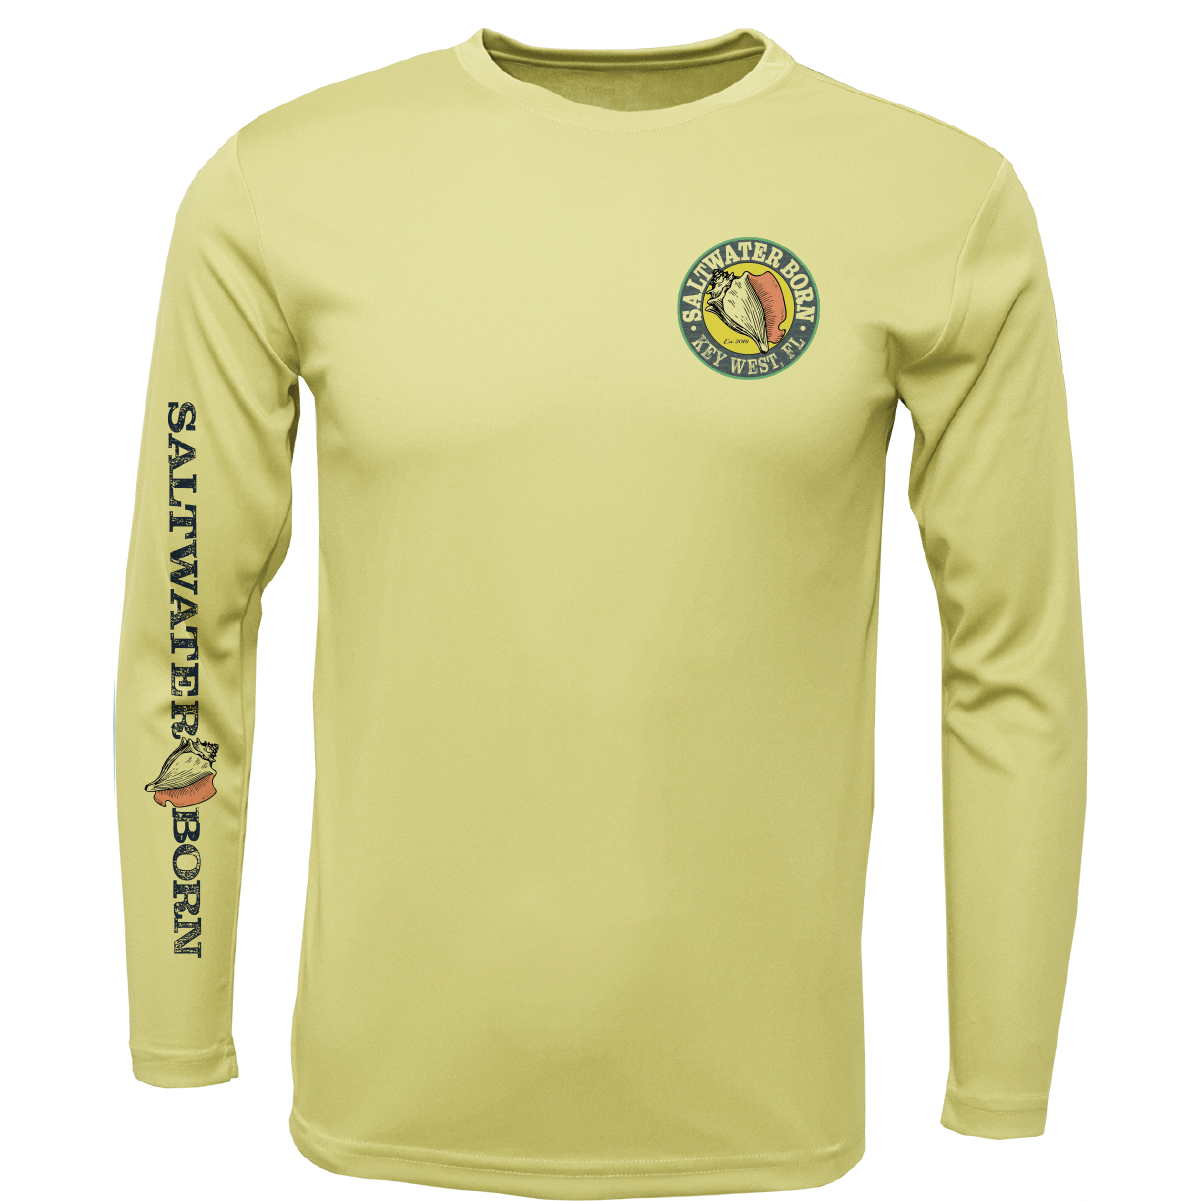 Key West, fl Kraken Long Sleeve UPF 50+ Dry-Fit Shirt in Canary | Size Small